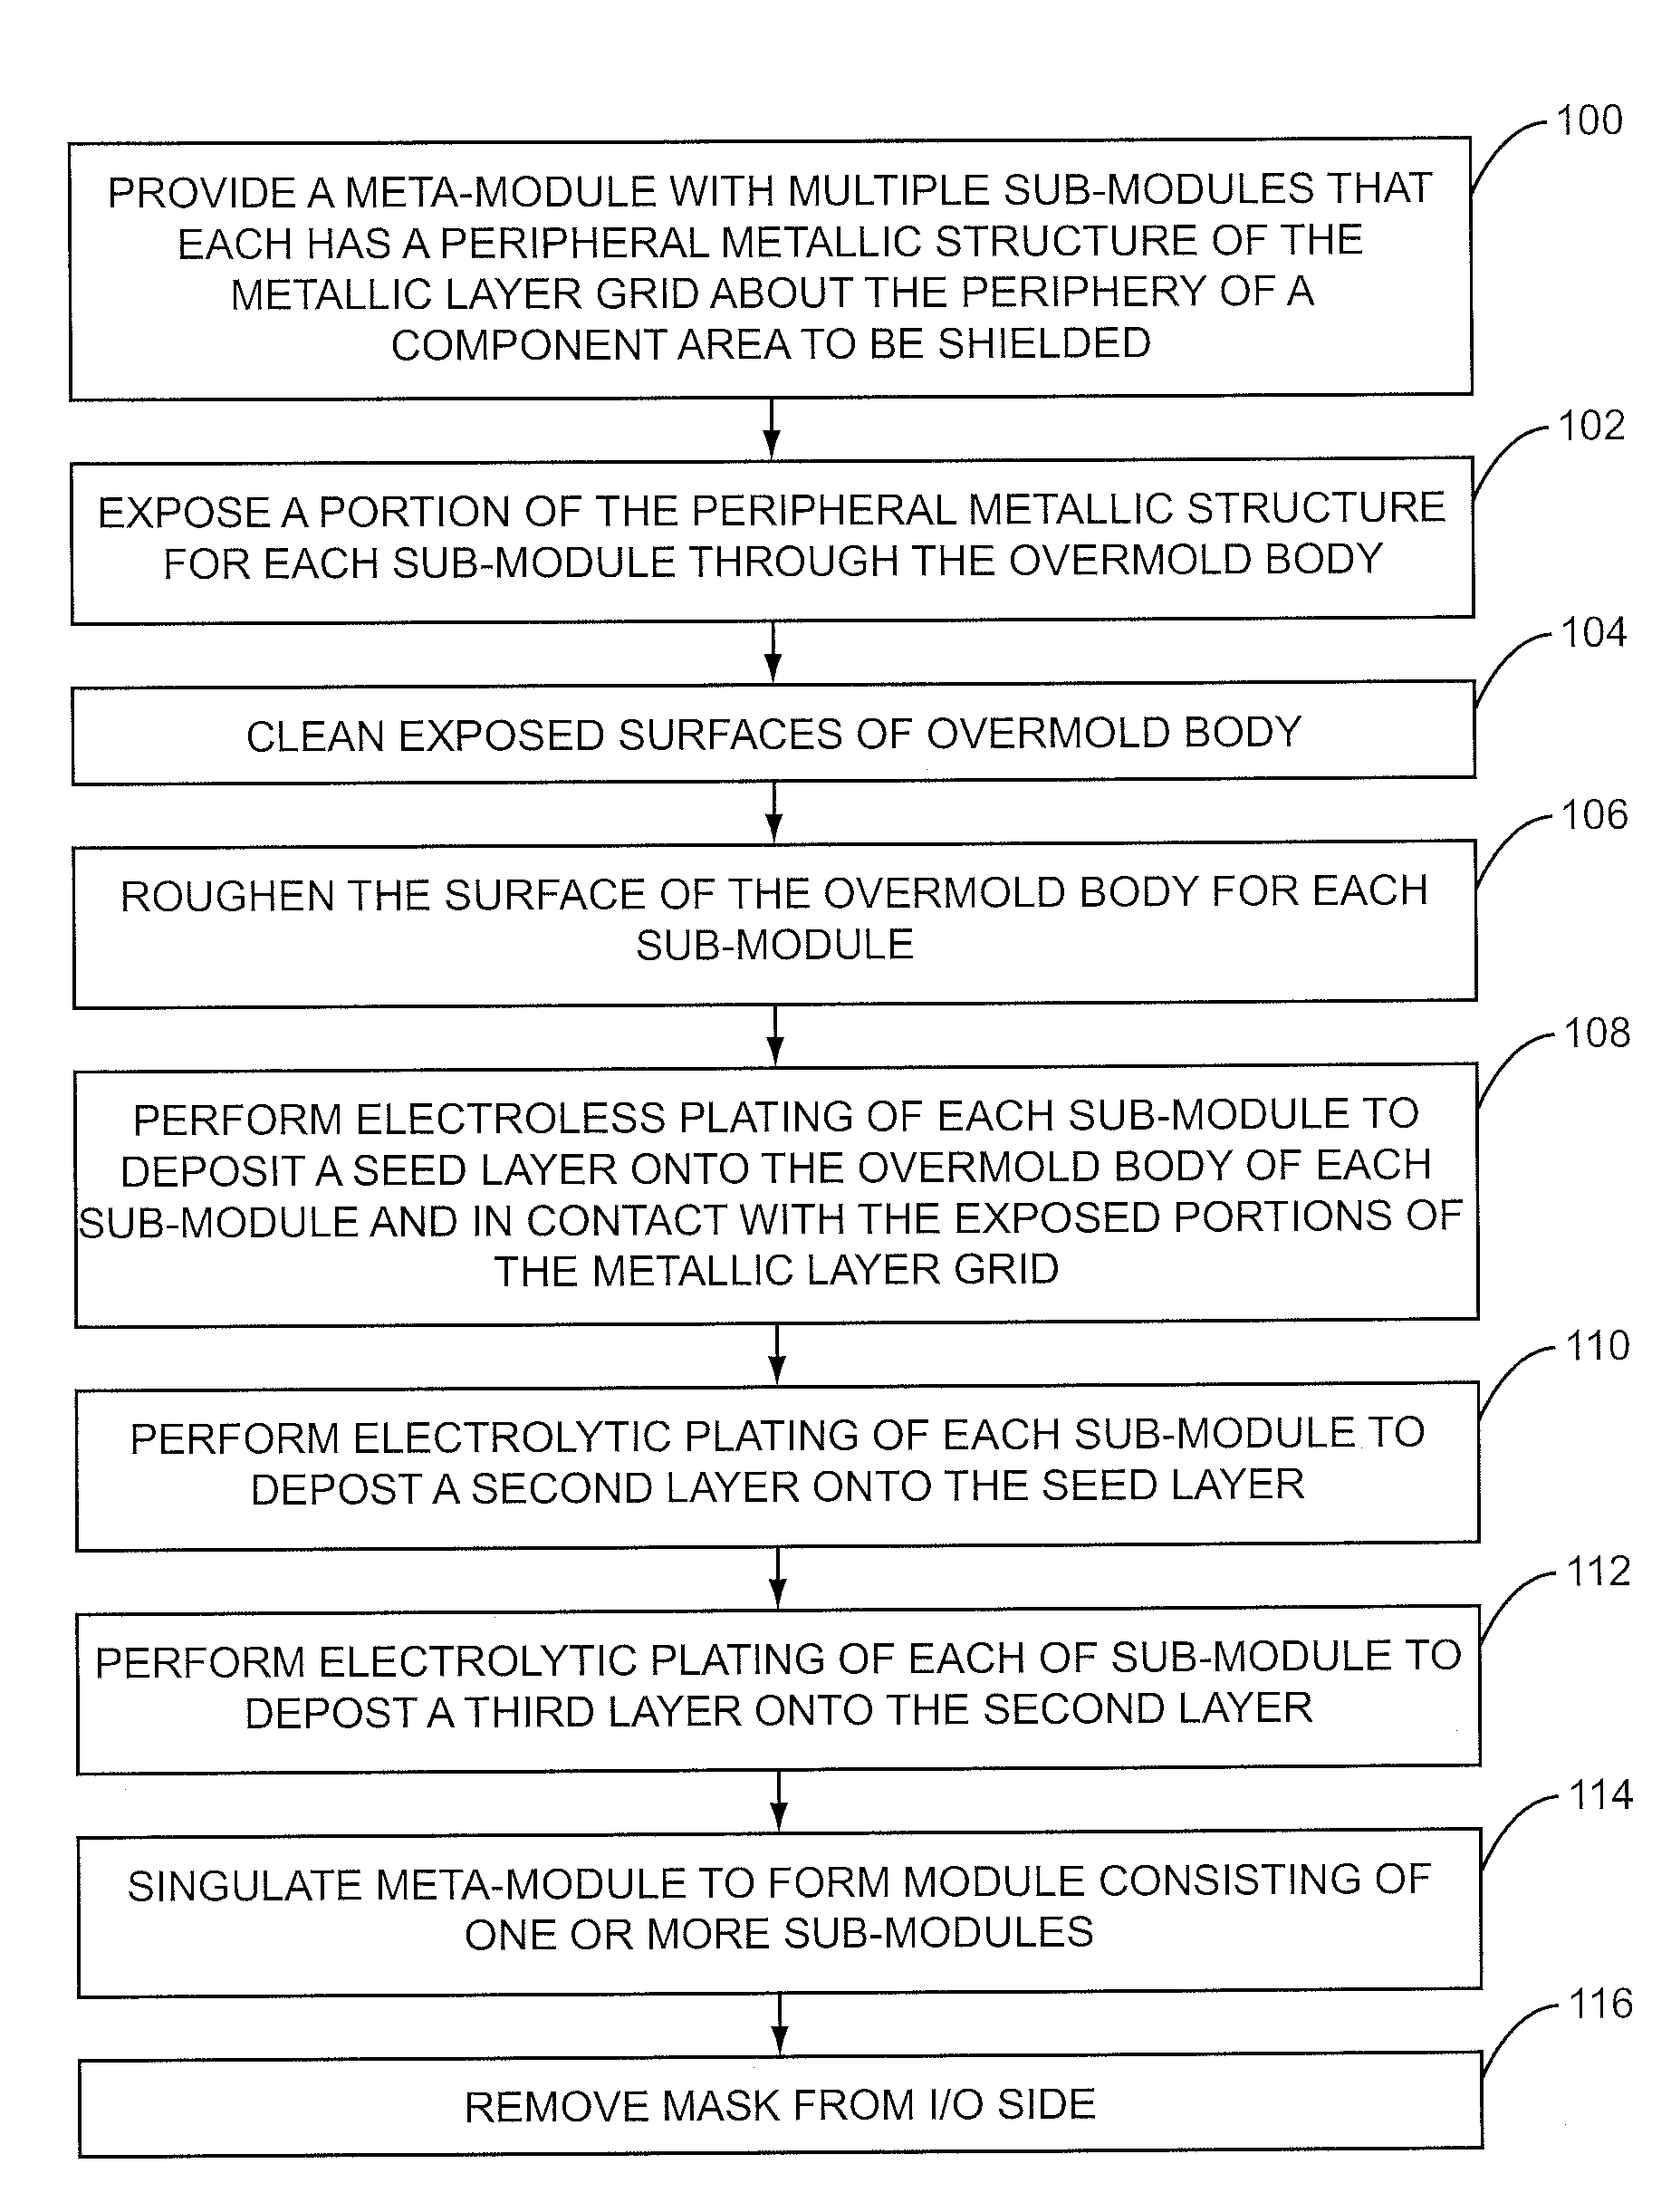 Isolated conformal shielding